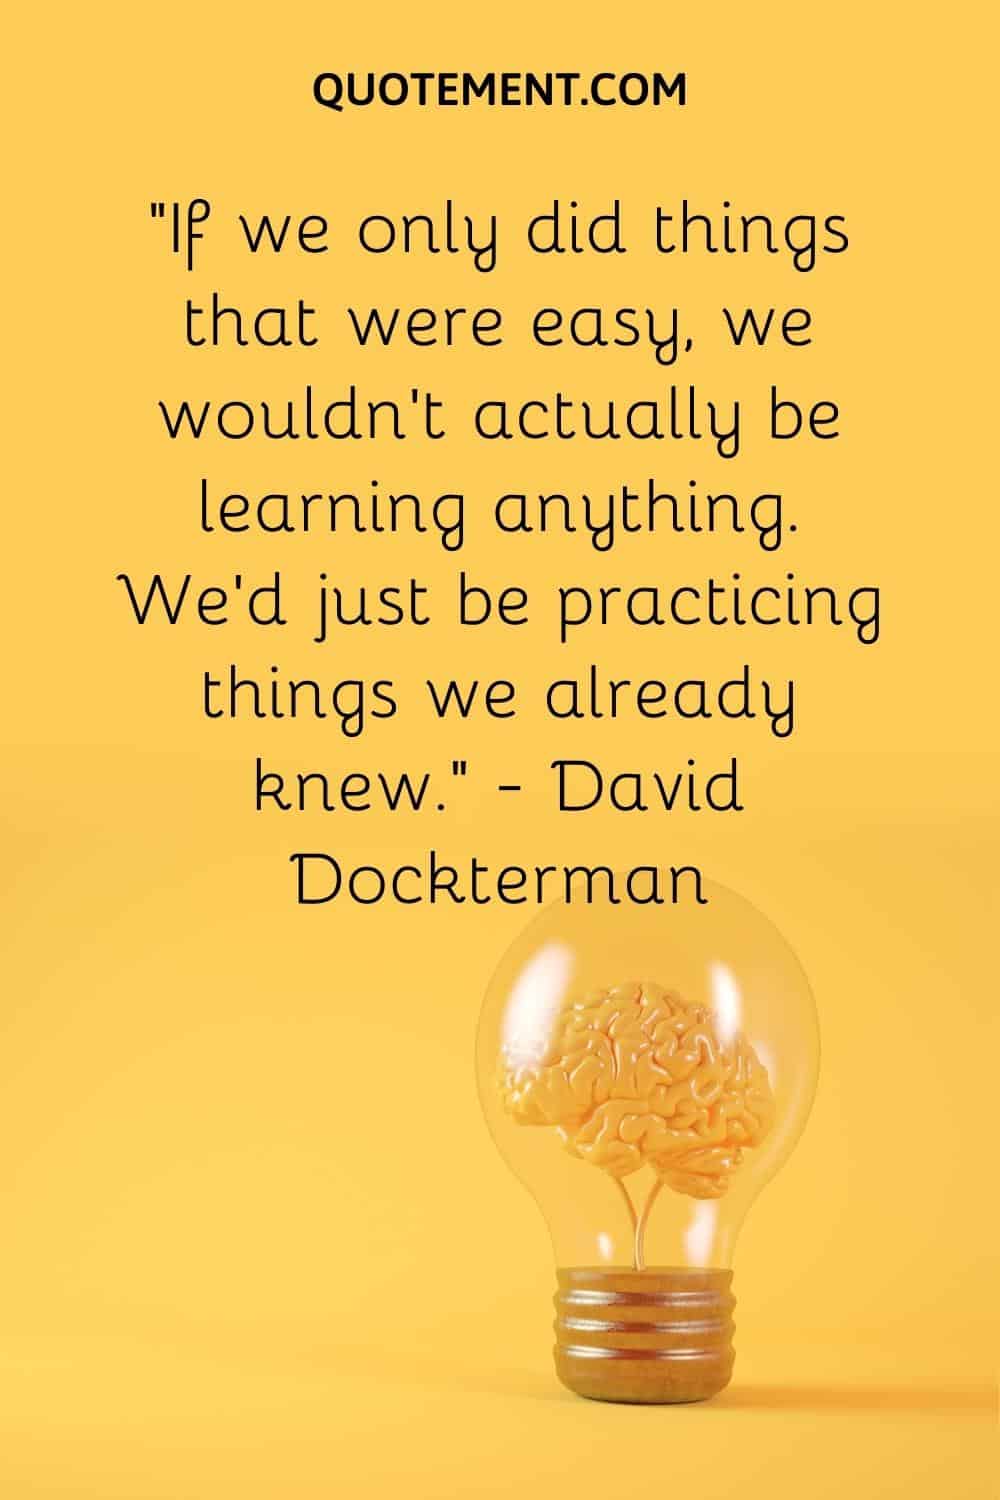 “If we only did things that were easy, we wouldn’t actually be learning anything. We’d just be practicing things we already knew.” — David Dockterman